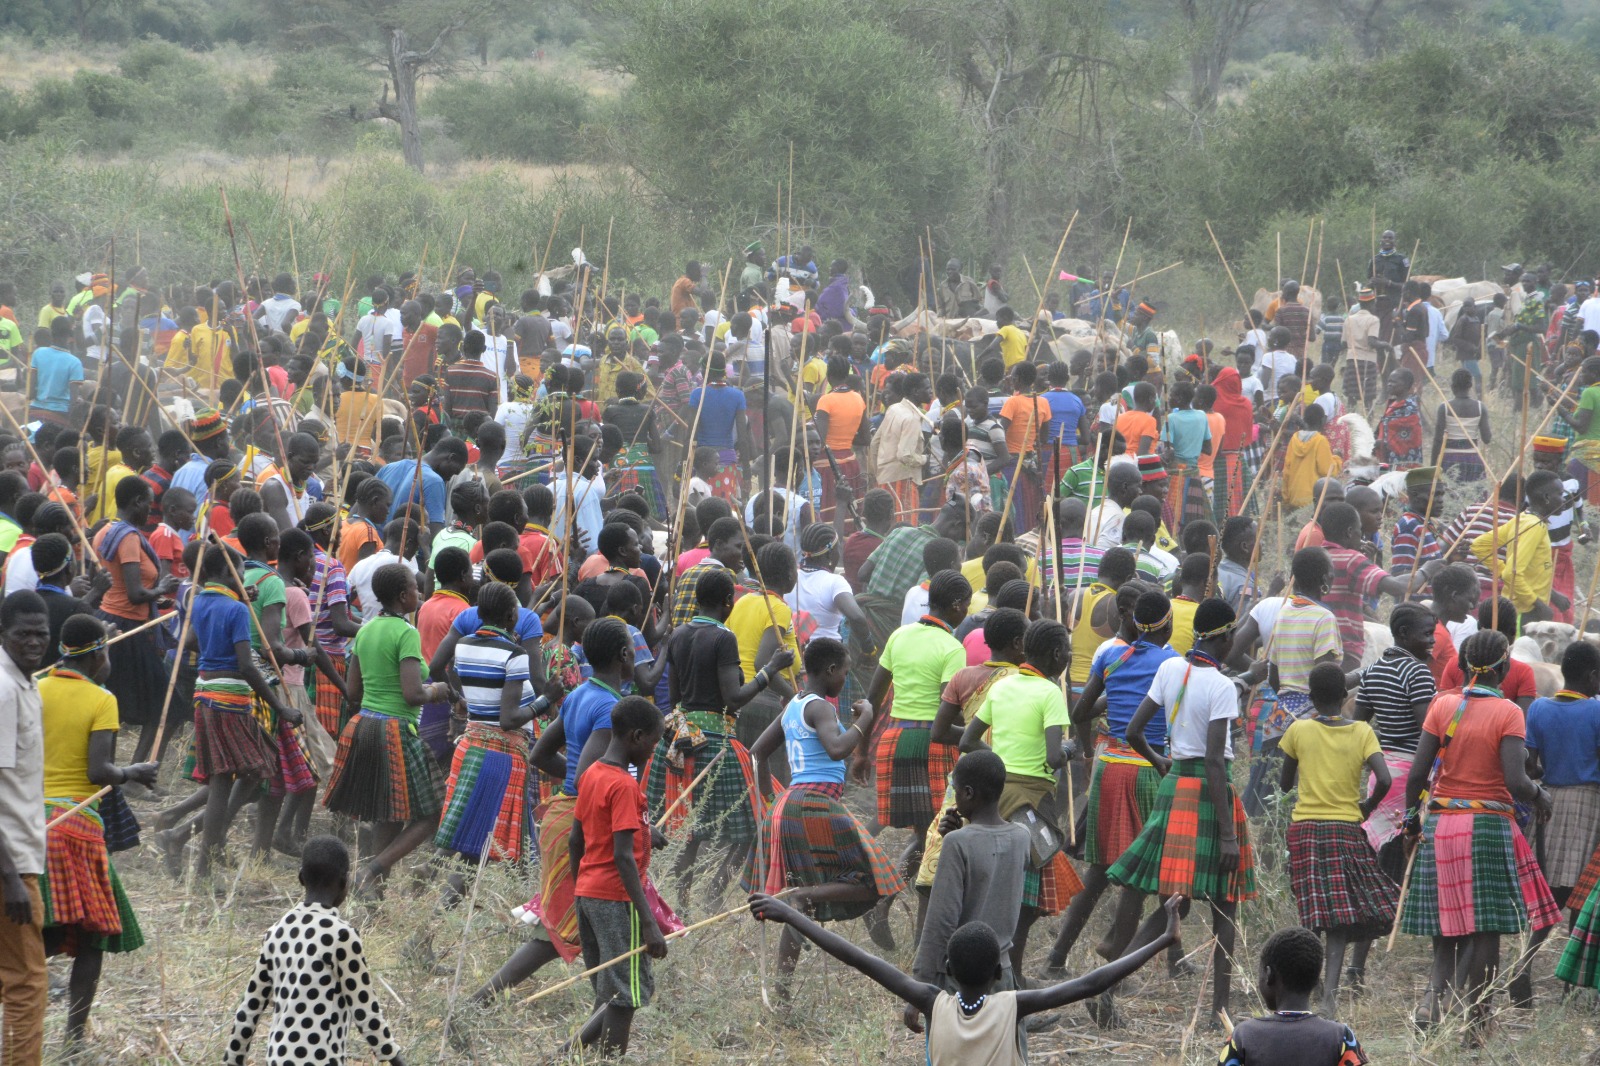 MPs ask gov't to retain Karamoja Dev't Agency in ongoing rationalization process